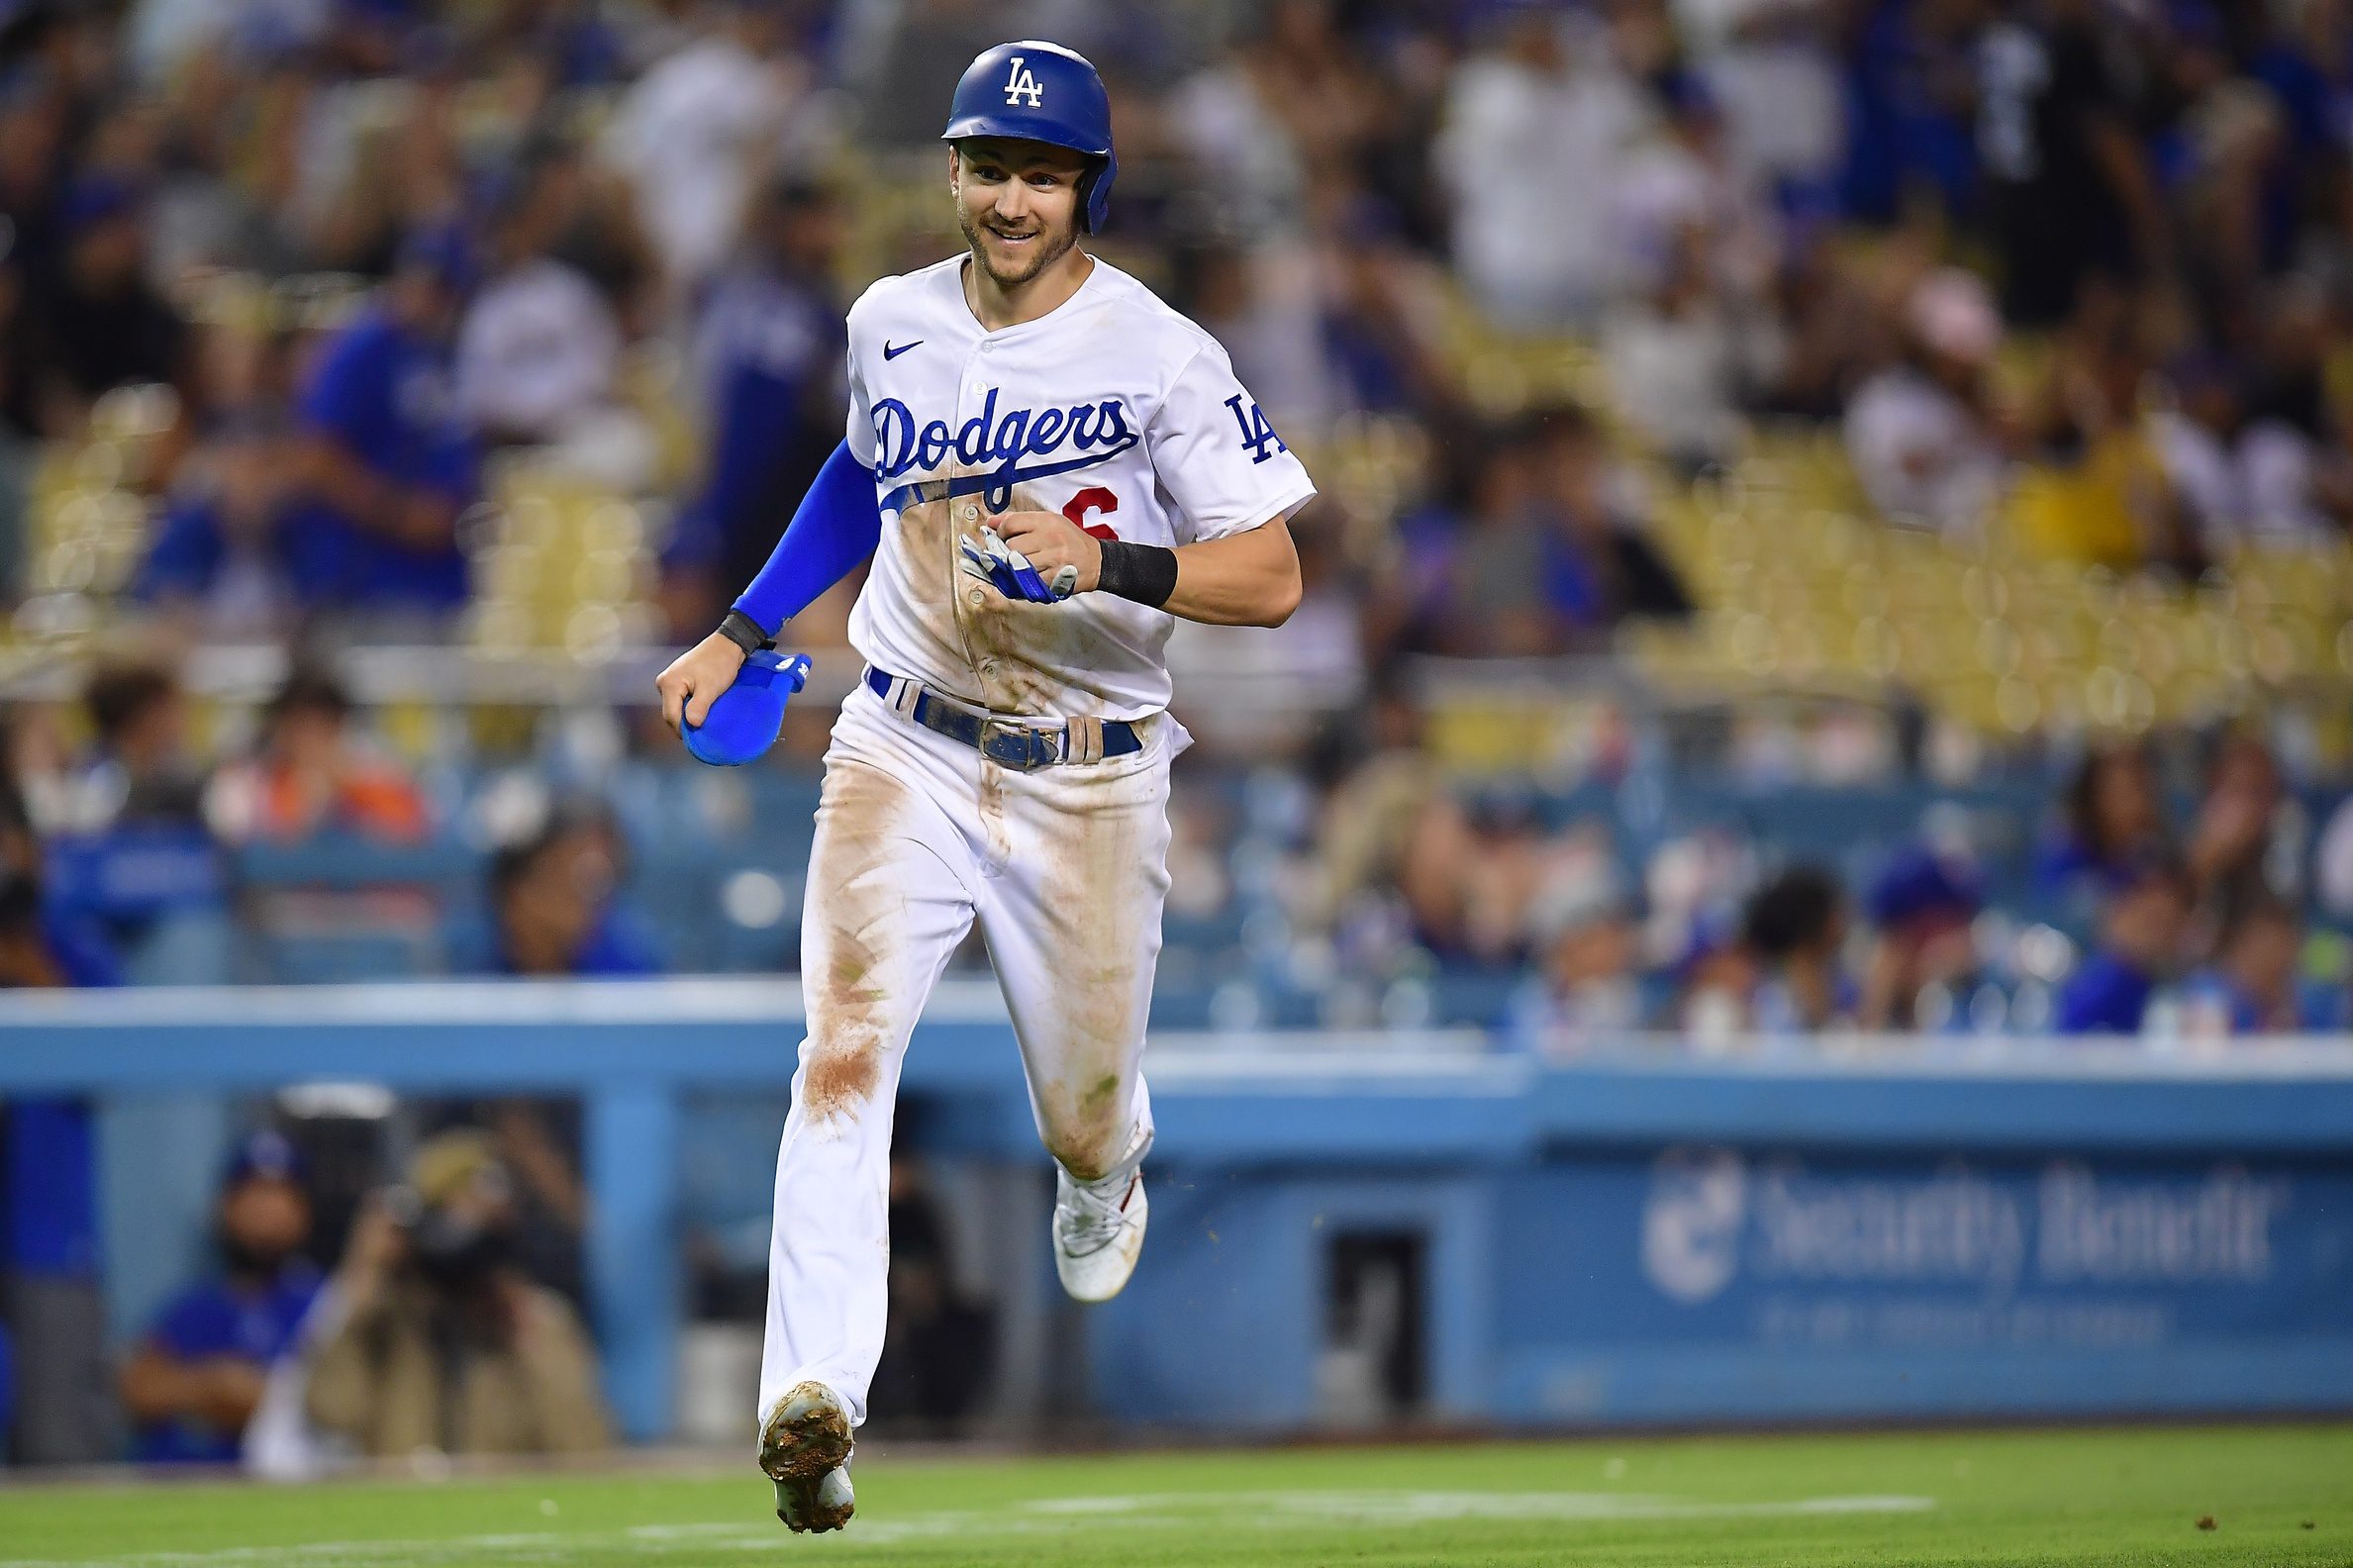 Next Up for the Los Angeles Dodgers: Extend Trea Turner